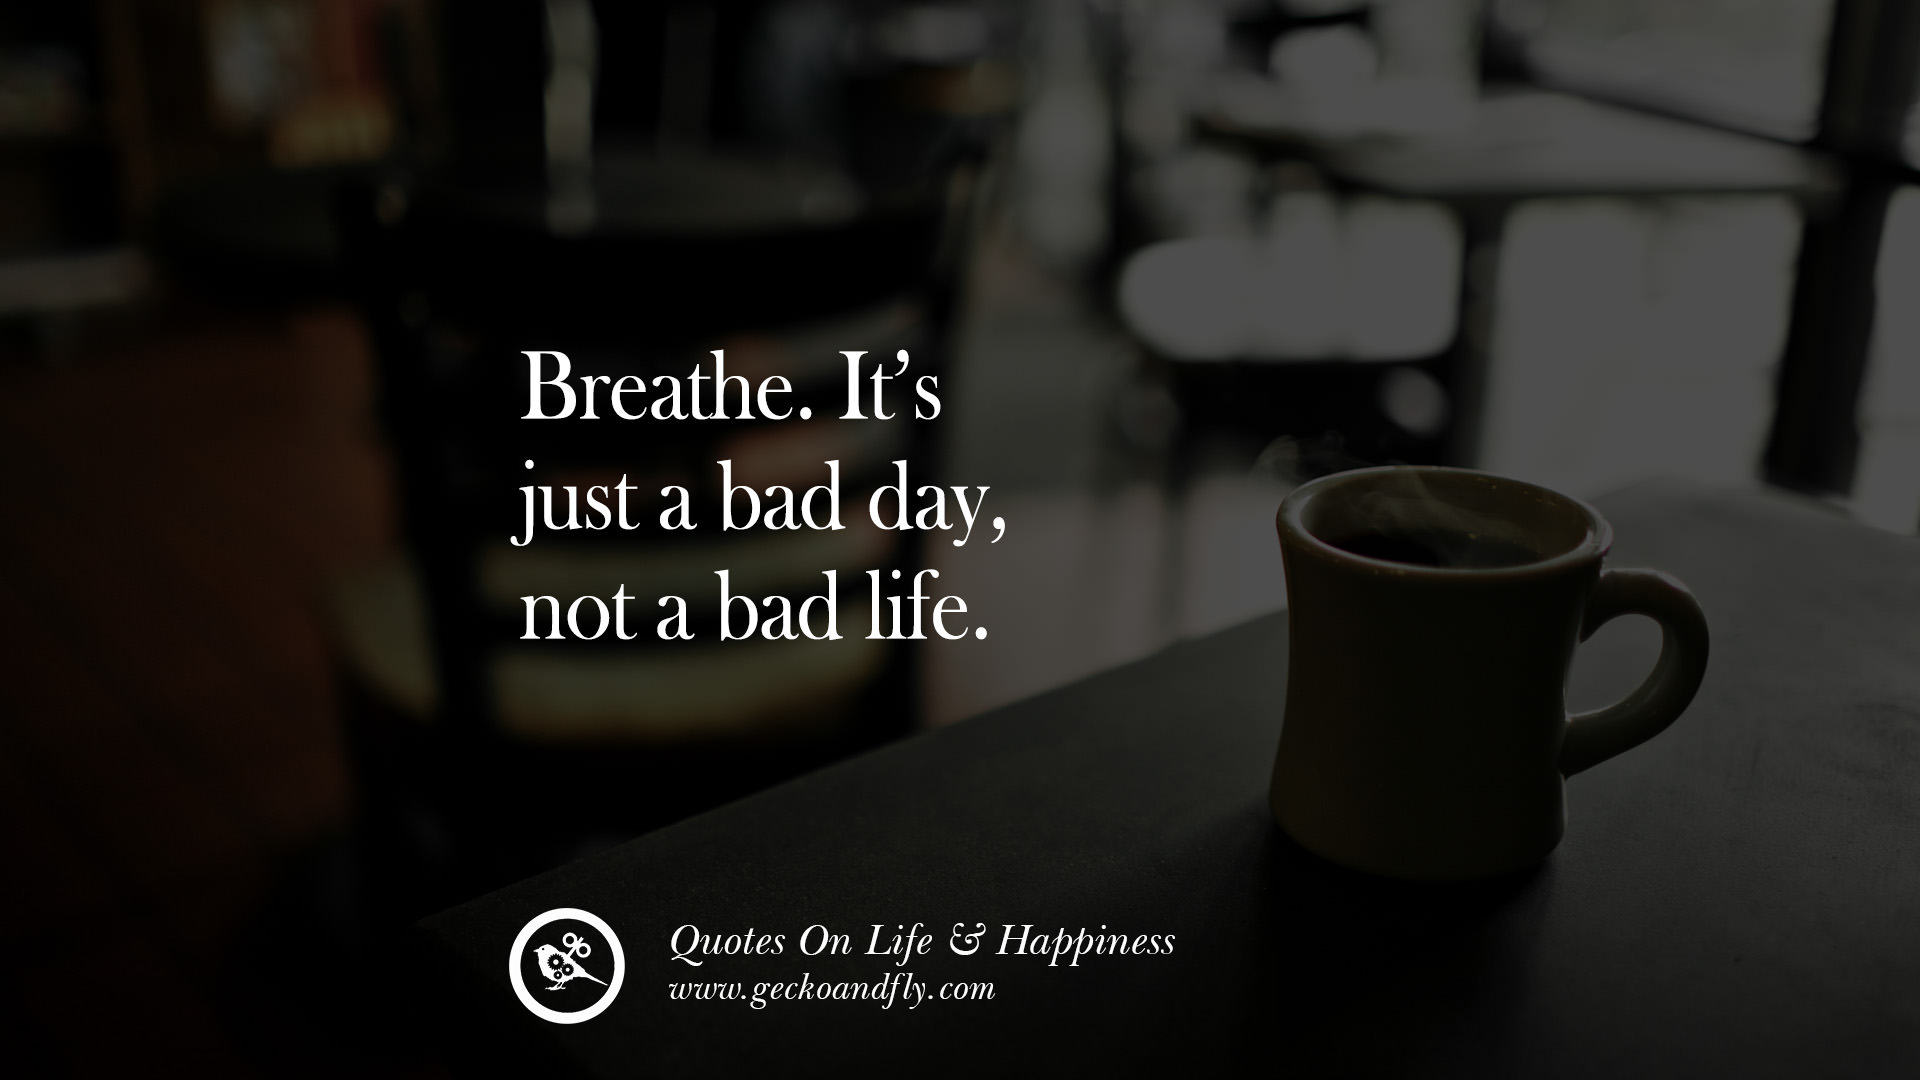 life. happy life quote instagram quotes about being happy with life ...